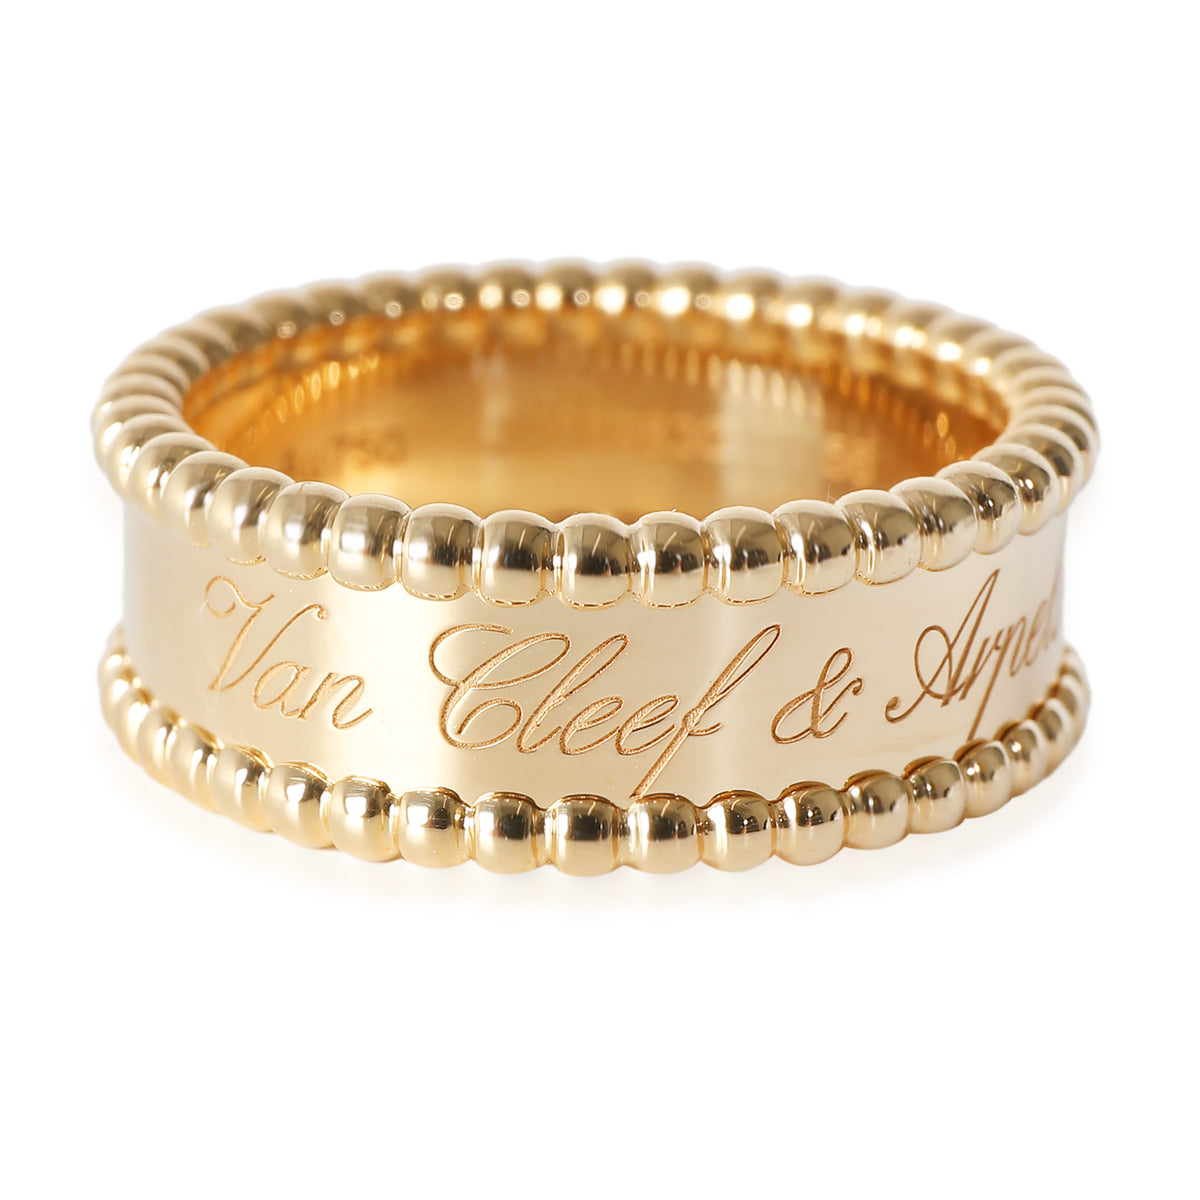 Perlee Band in 18K Yellow Gold